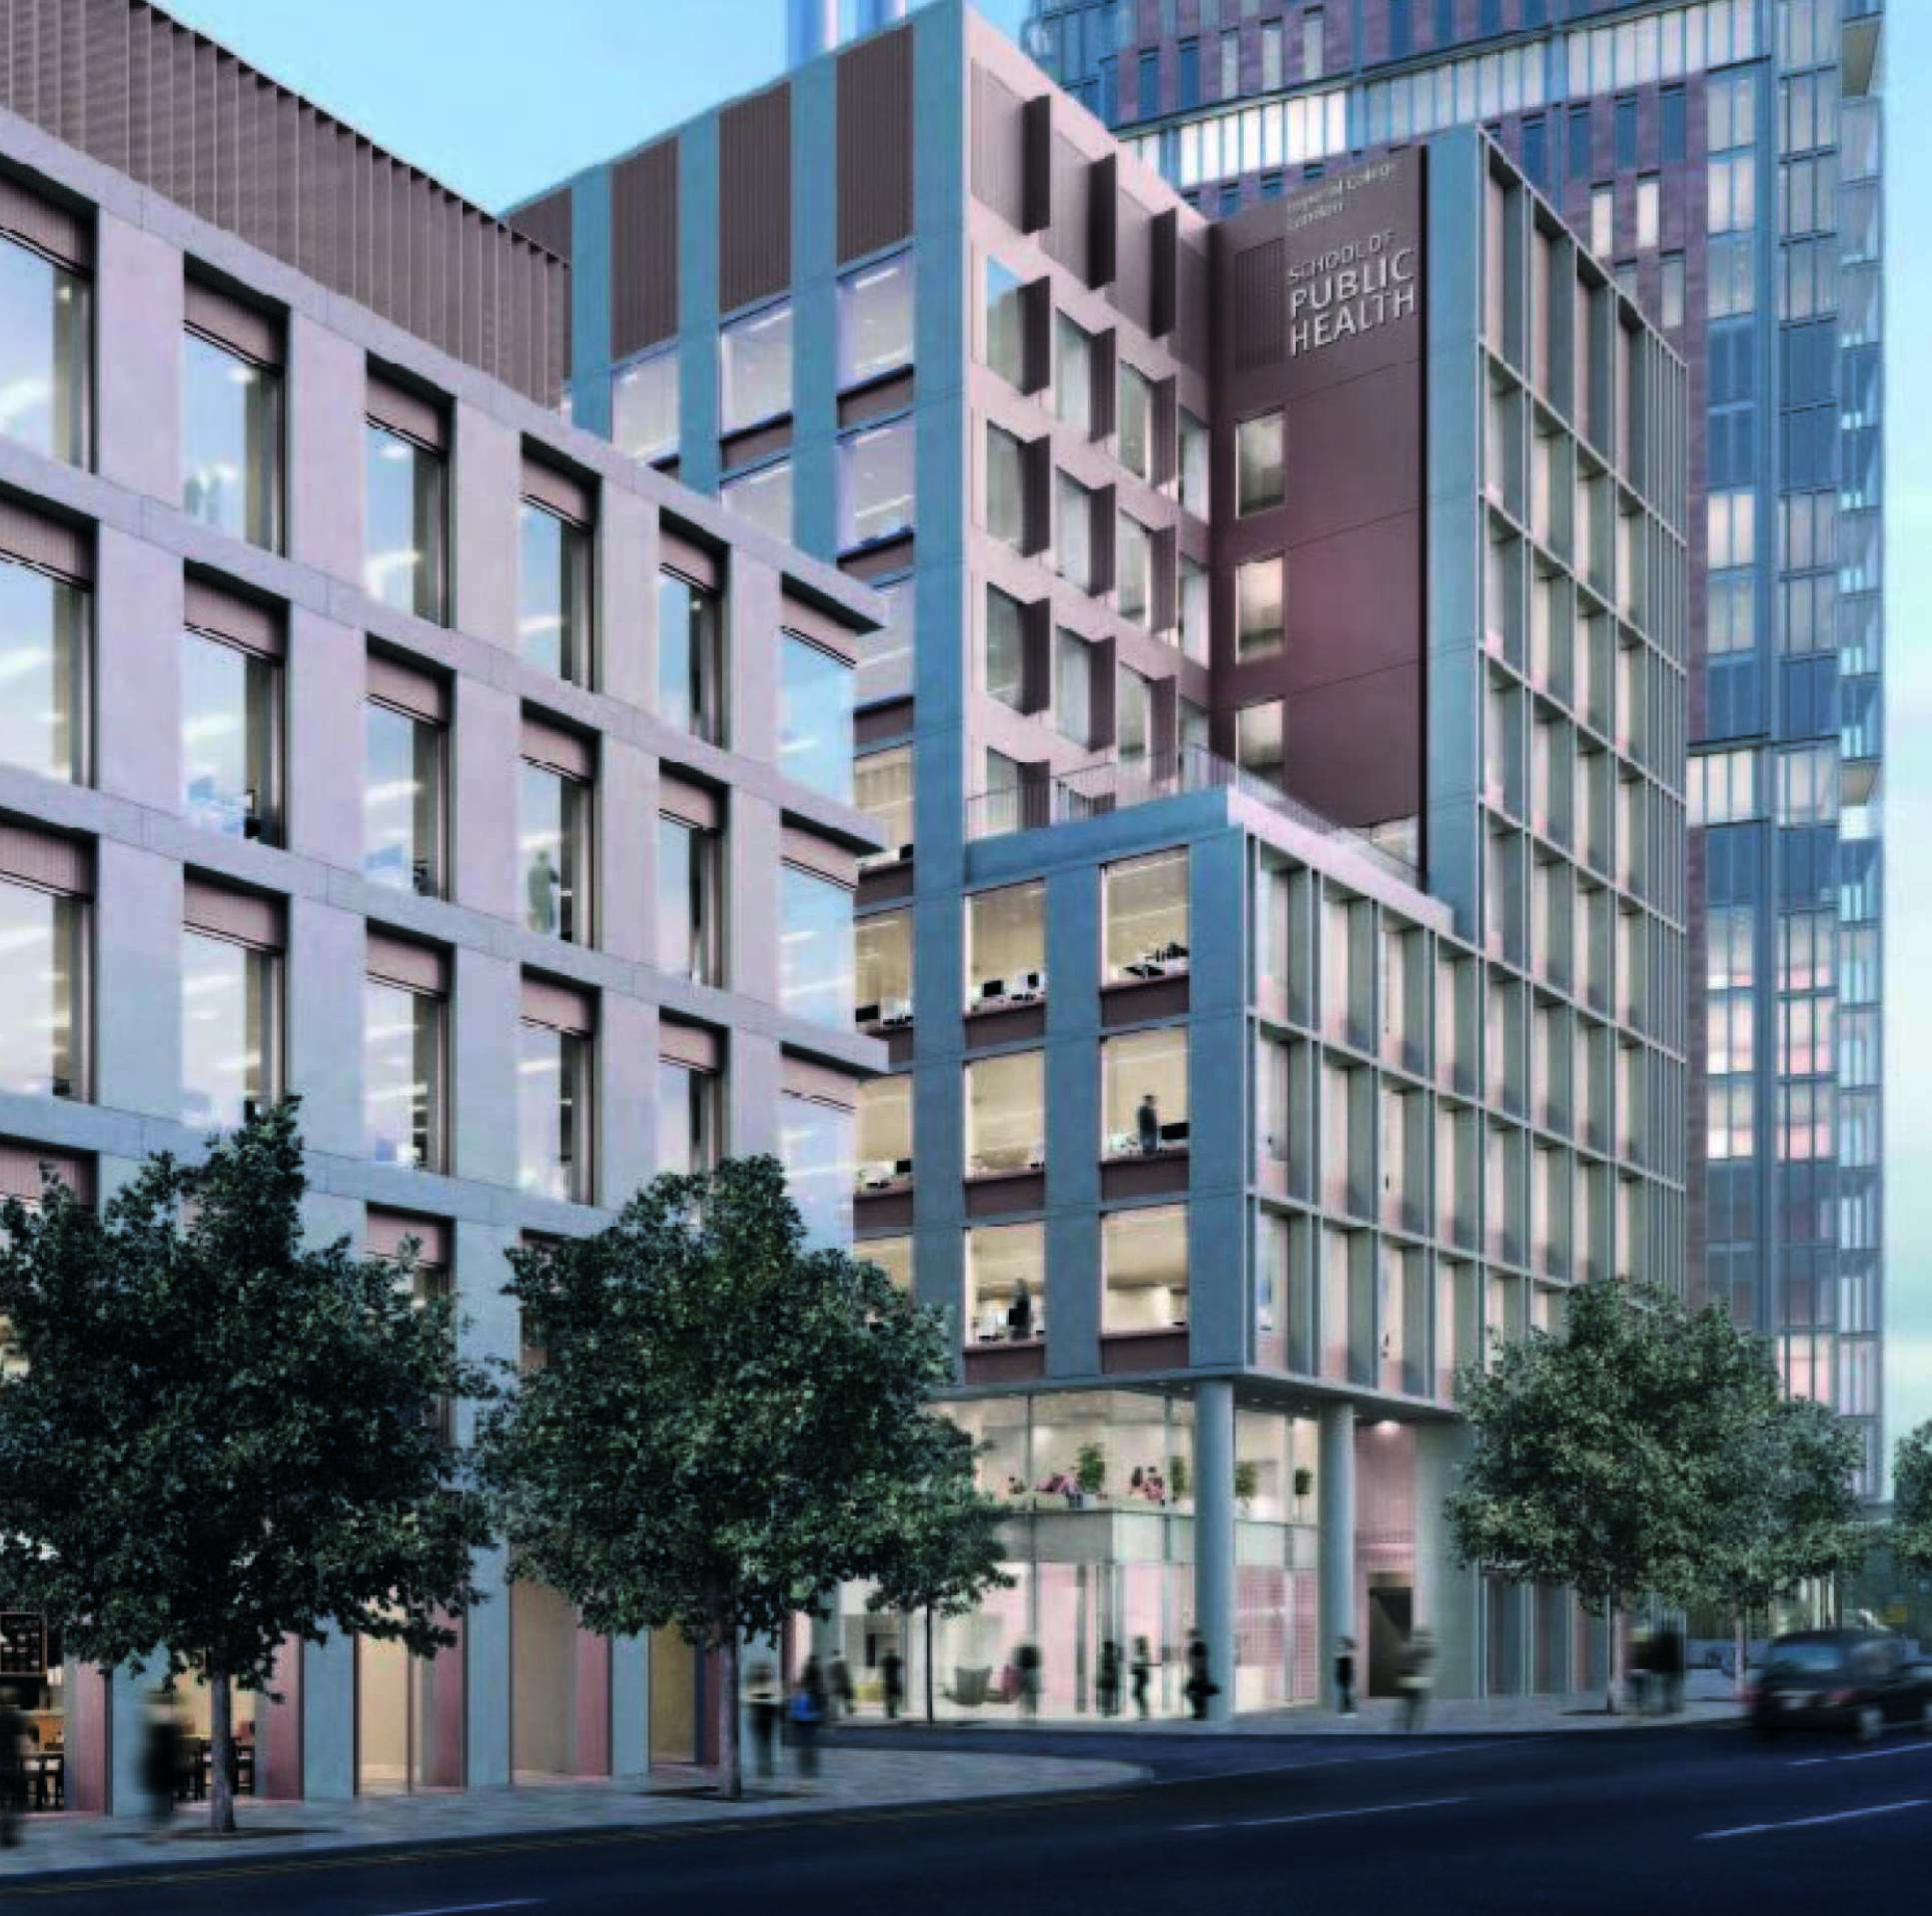 CGI of Imperial's new School of Public Health at White City